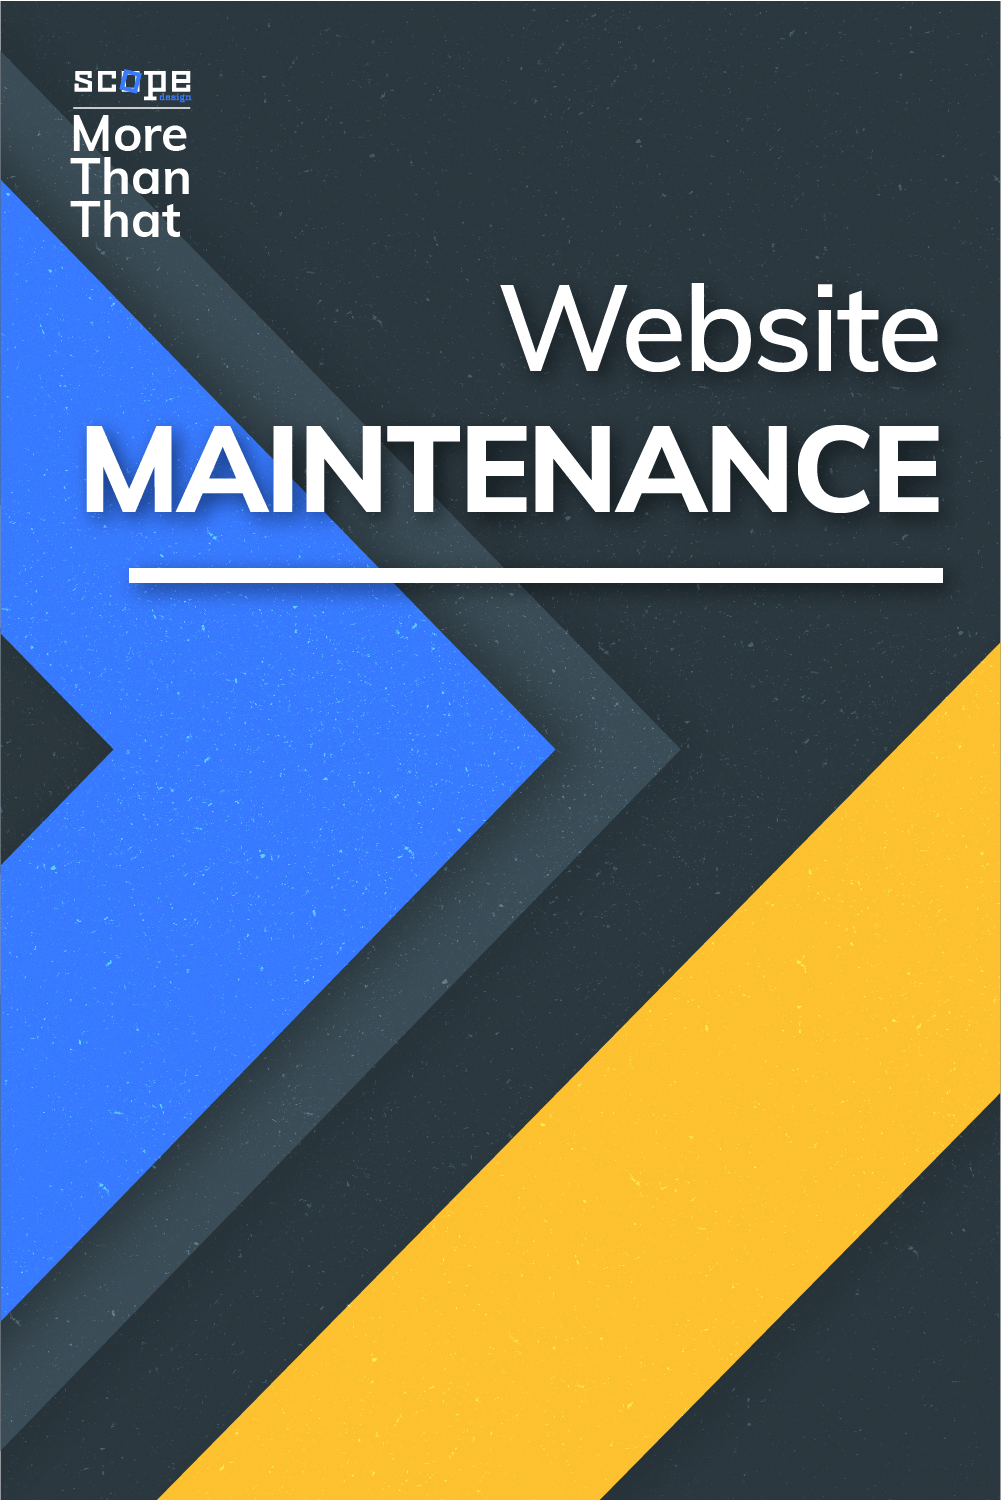 Having to do your website maintenance can be a pain. Sure, some people are prepared to do that, but most people should leave it to the experts, like us! via @scopedesign